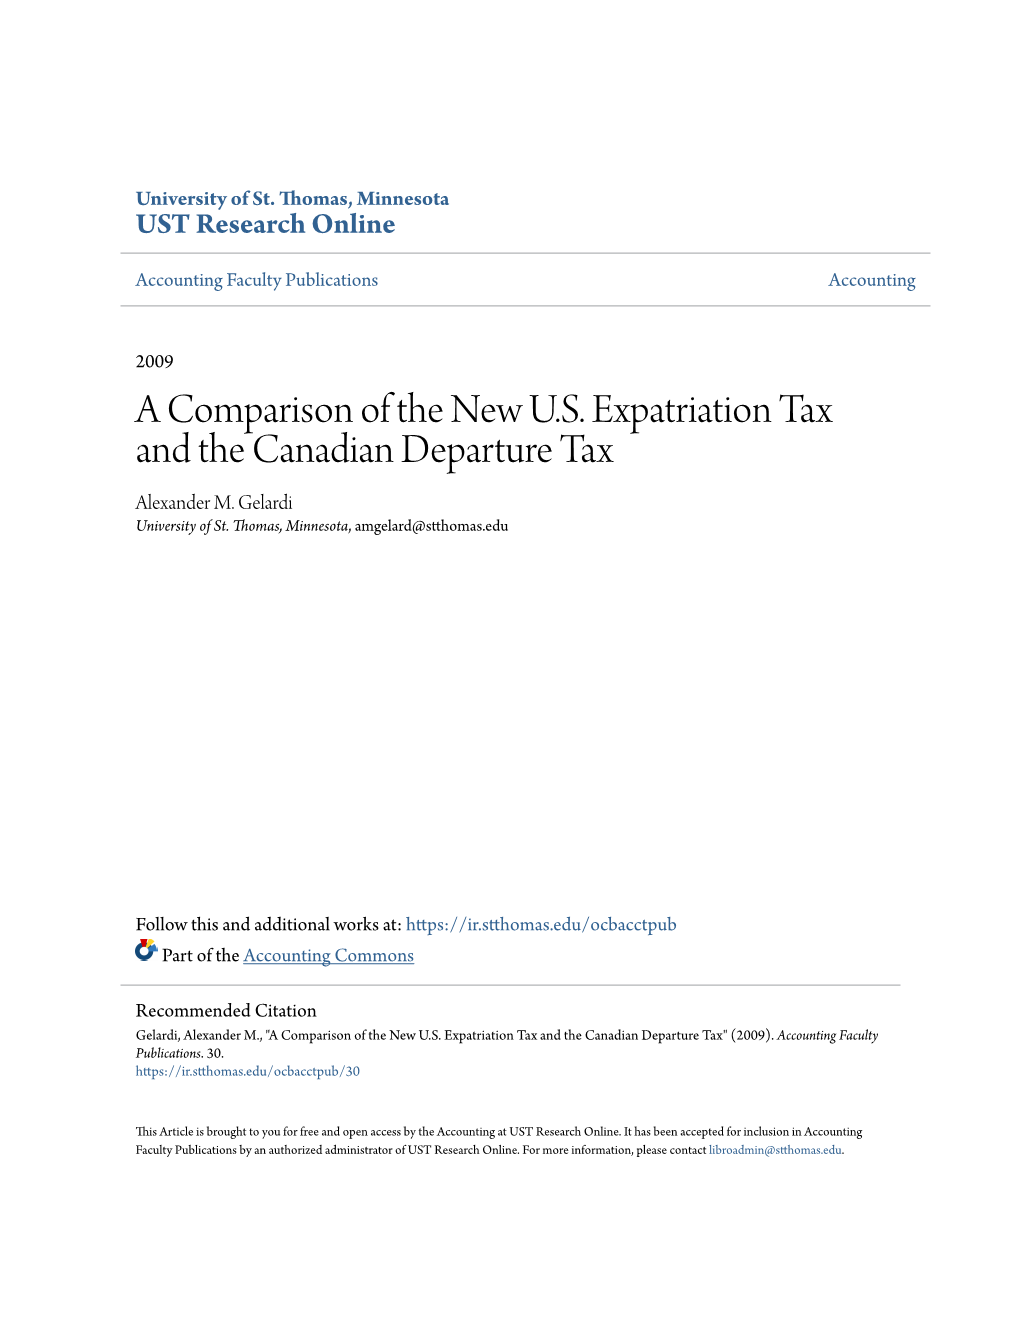 A Comparison of the New U.S. Expatriation Tax and the Canadian Departure Tax Alexander M